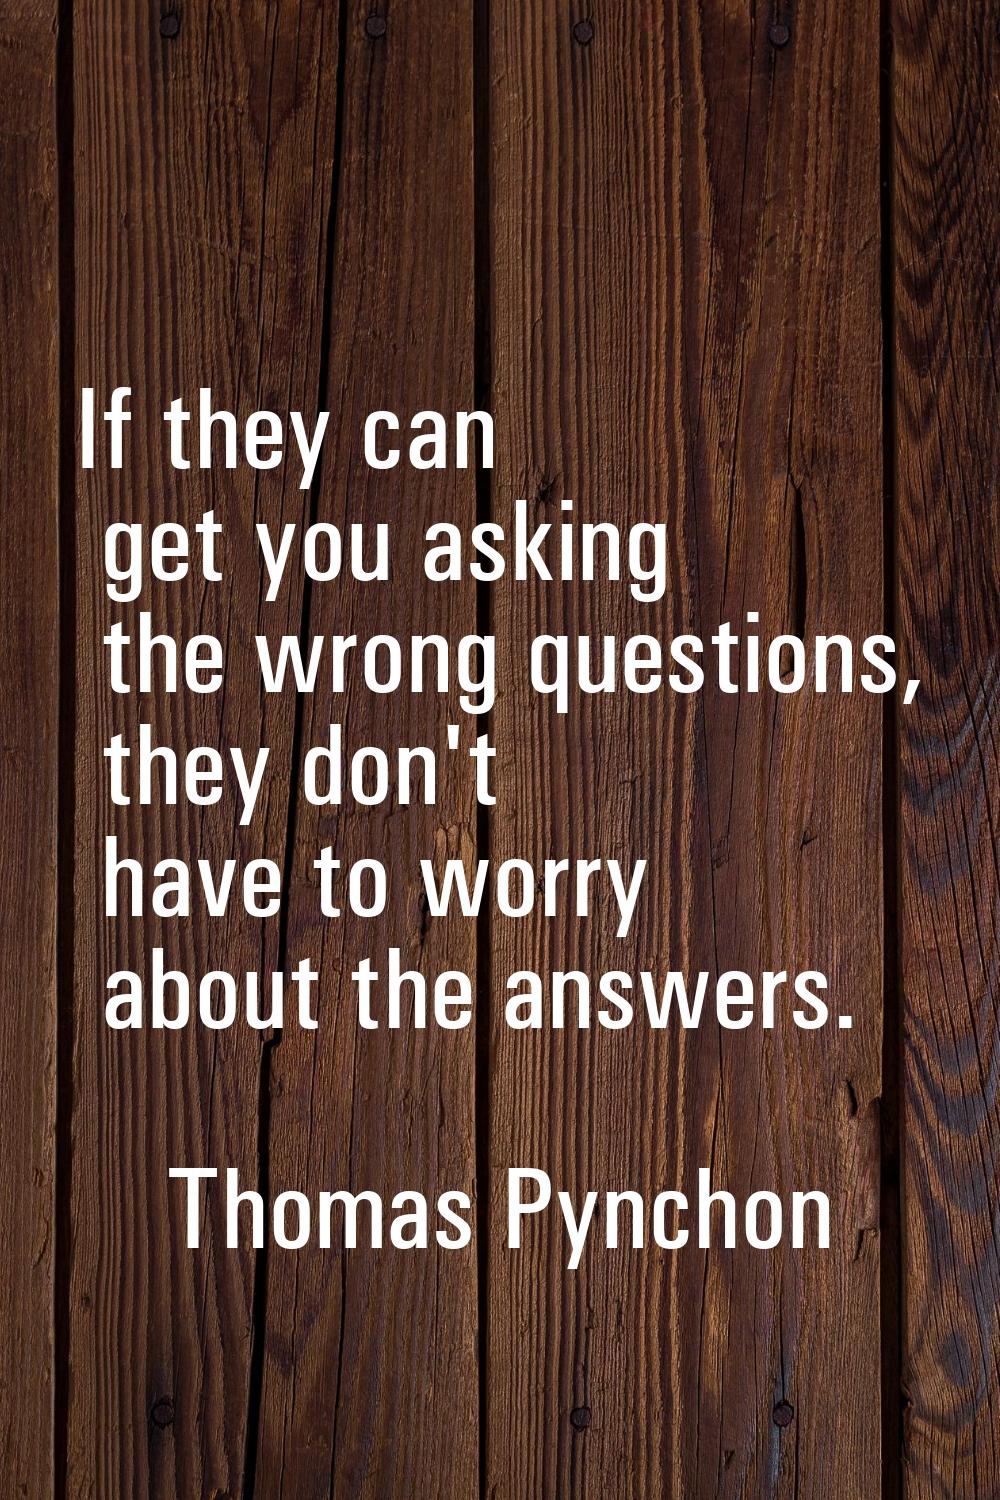 If they can get you asking the wrong questions, they don't have to worry about the answers.